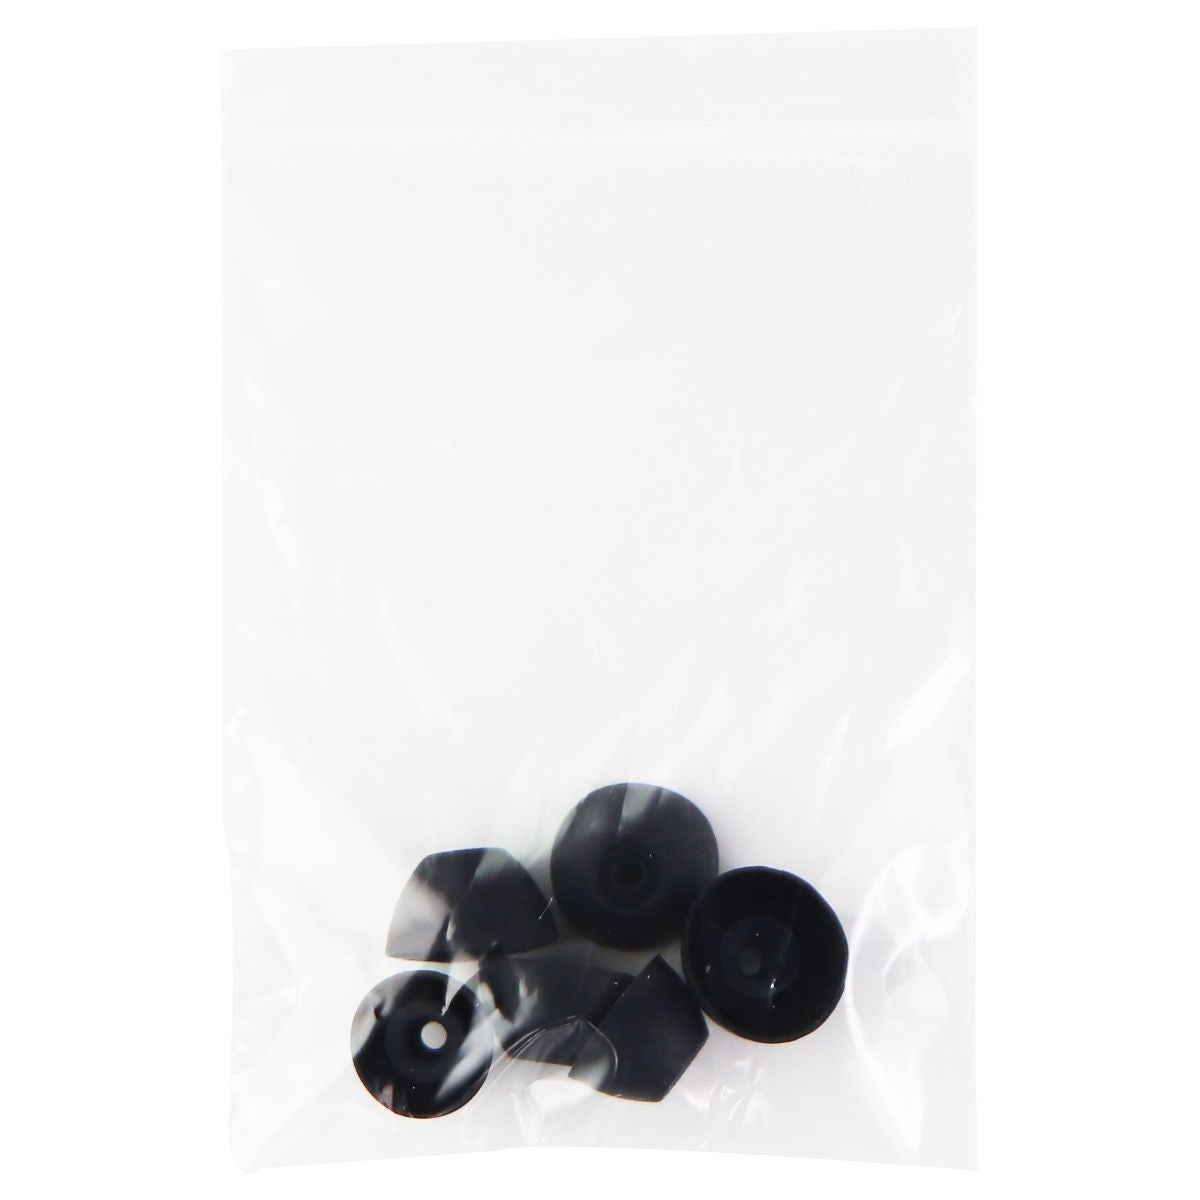 Replacement Ear-Gel Pack for Samsung Galaxy Buds & (Buds+) - Black (6 Pack) Portable Audio & Headphones - Replacement Parts & Tools Unbranded    - Simple Cell Bulk Wholesale Pricing - USA Seller